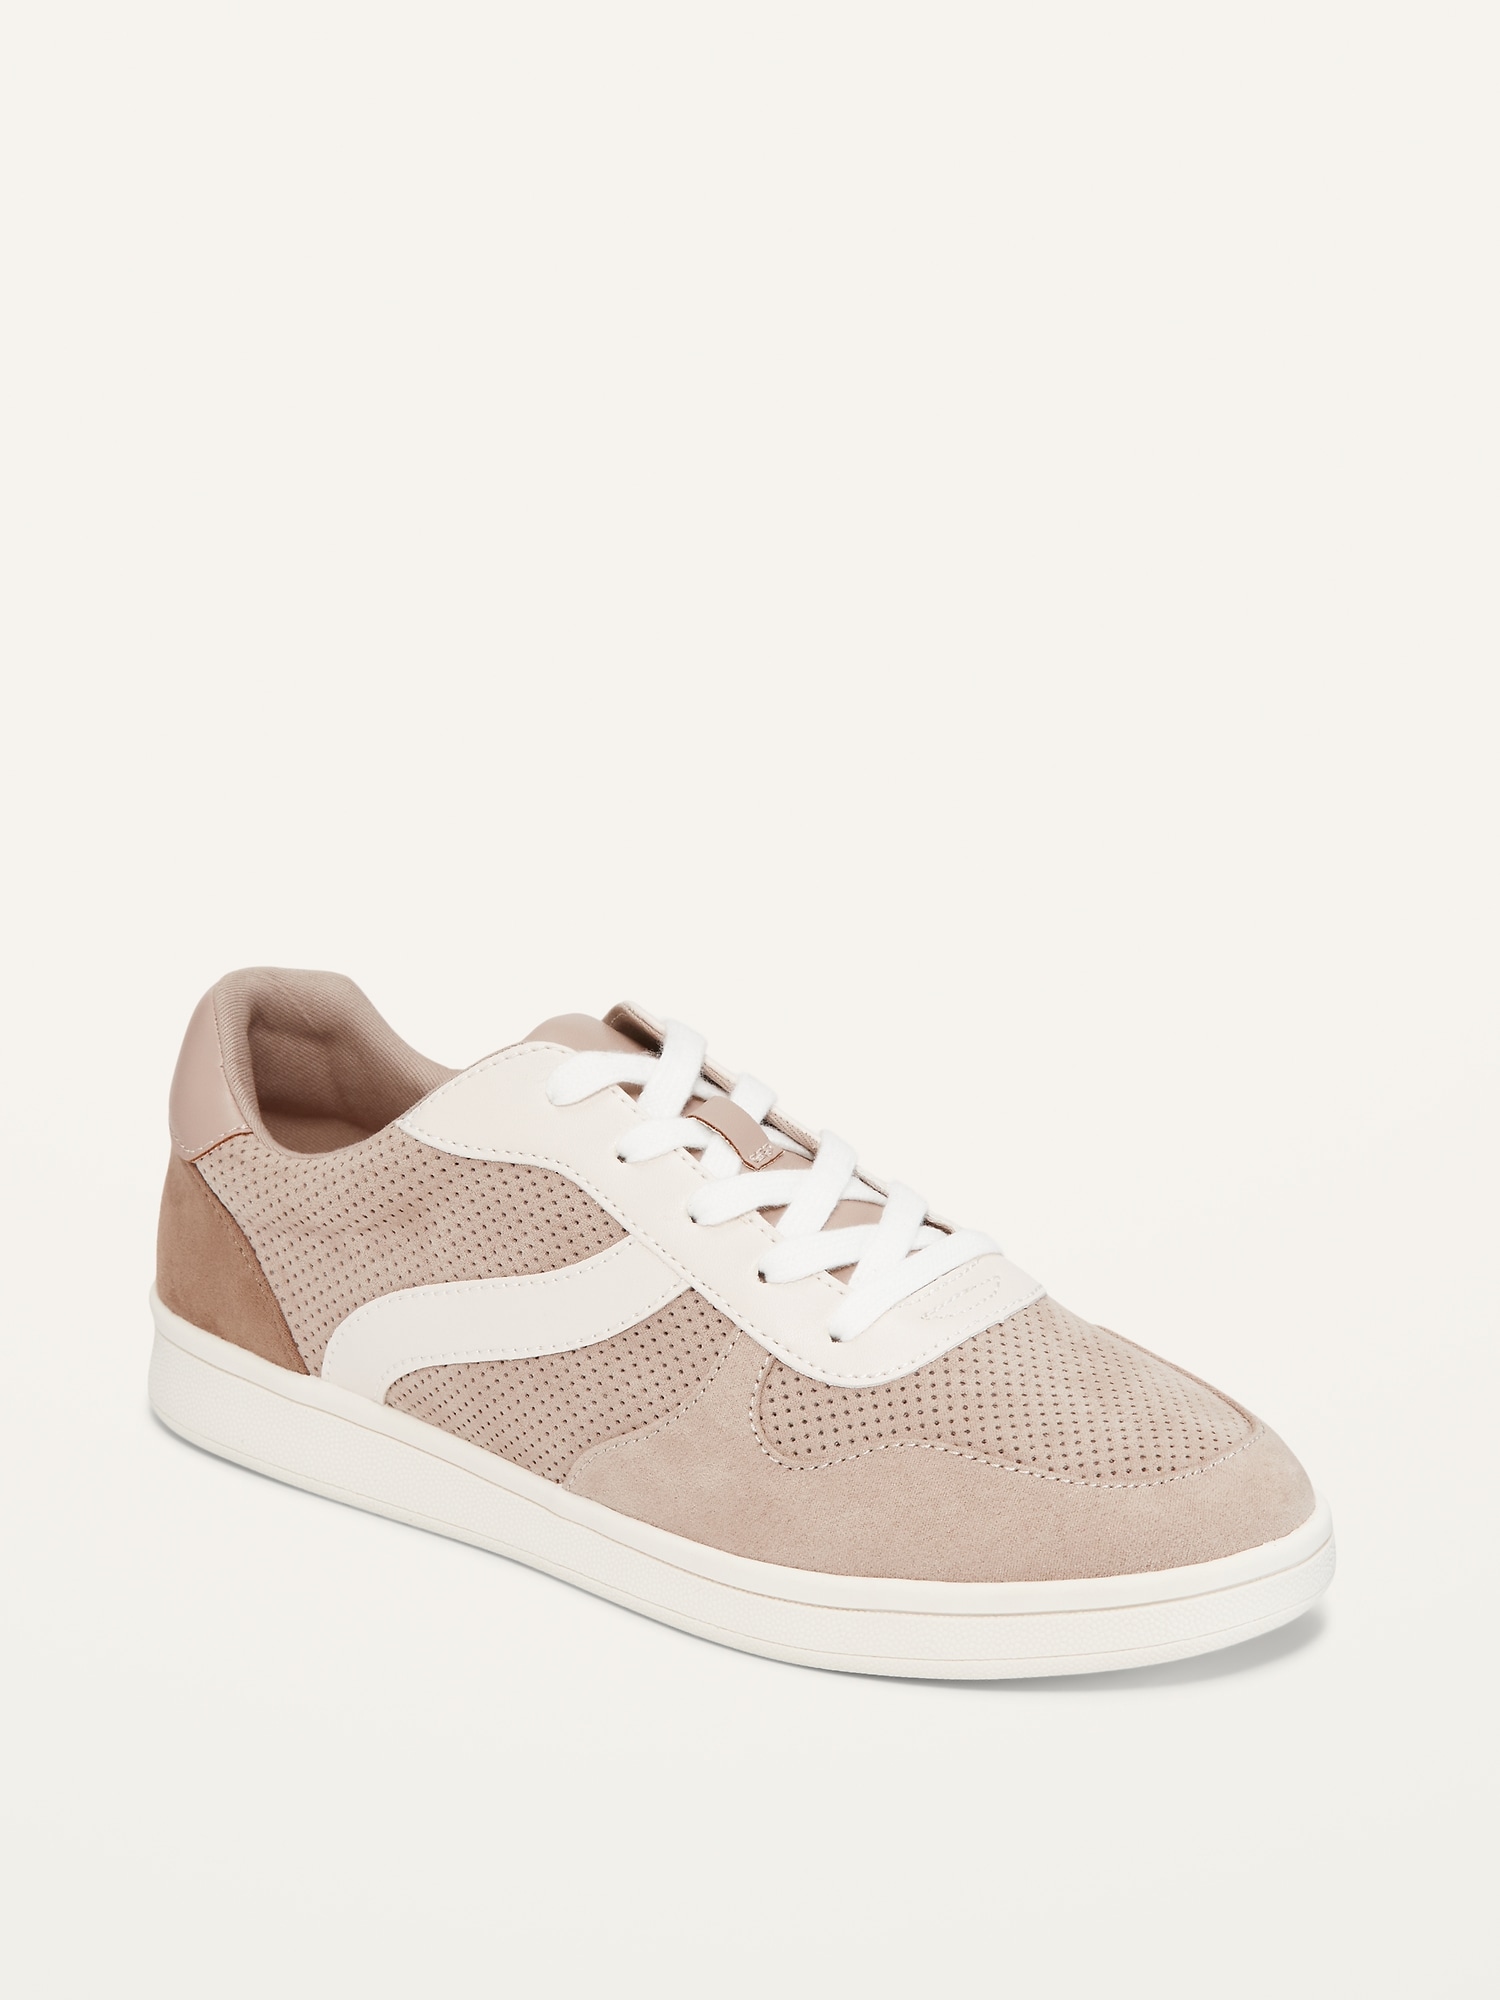 Old Navy Soft-Brushed Faux-Suede Sneakers For Women brown. 1